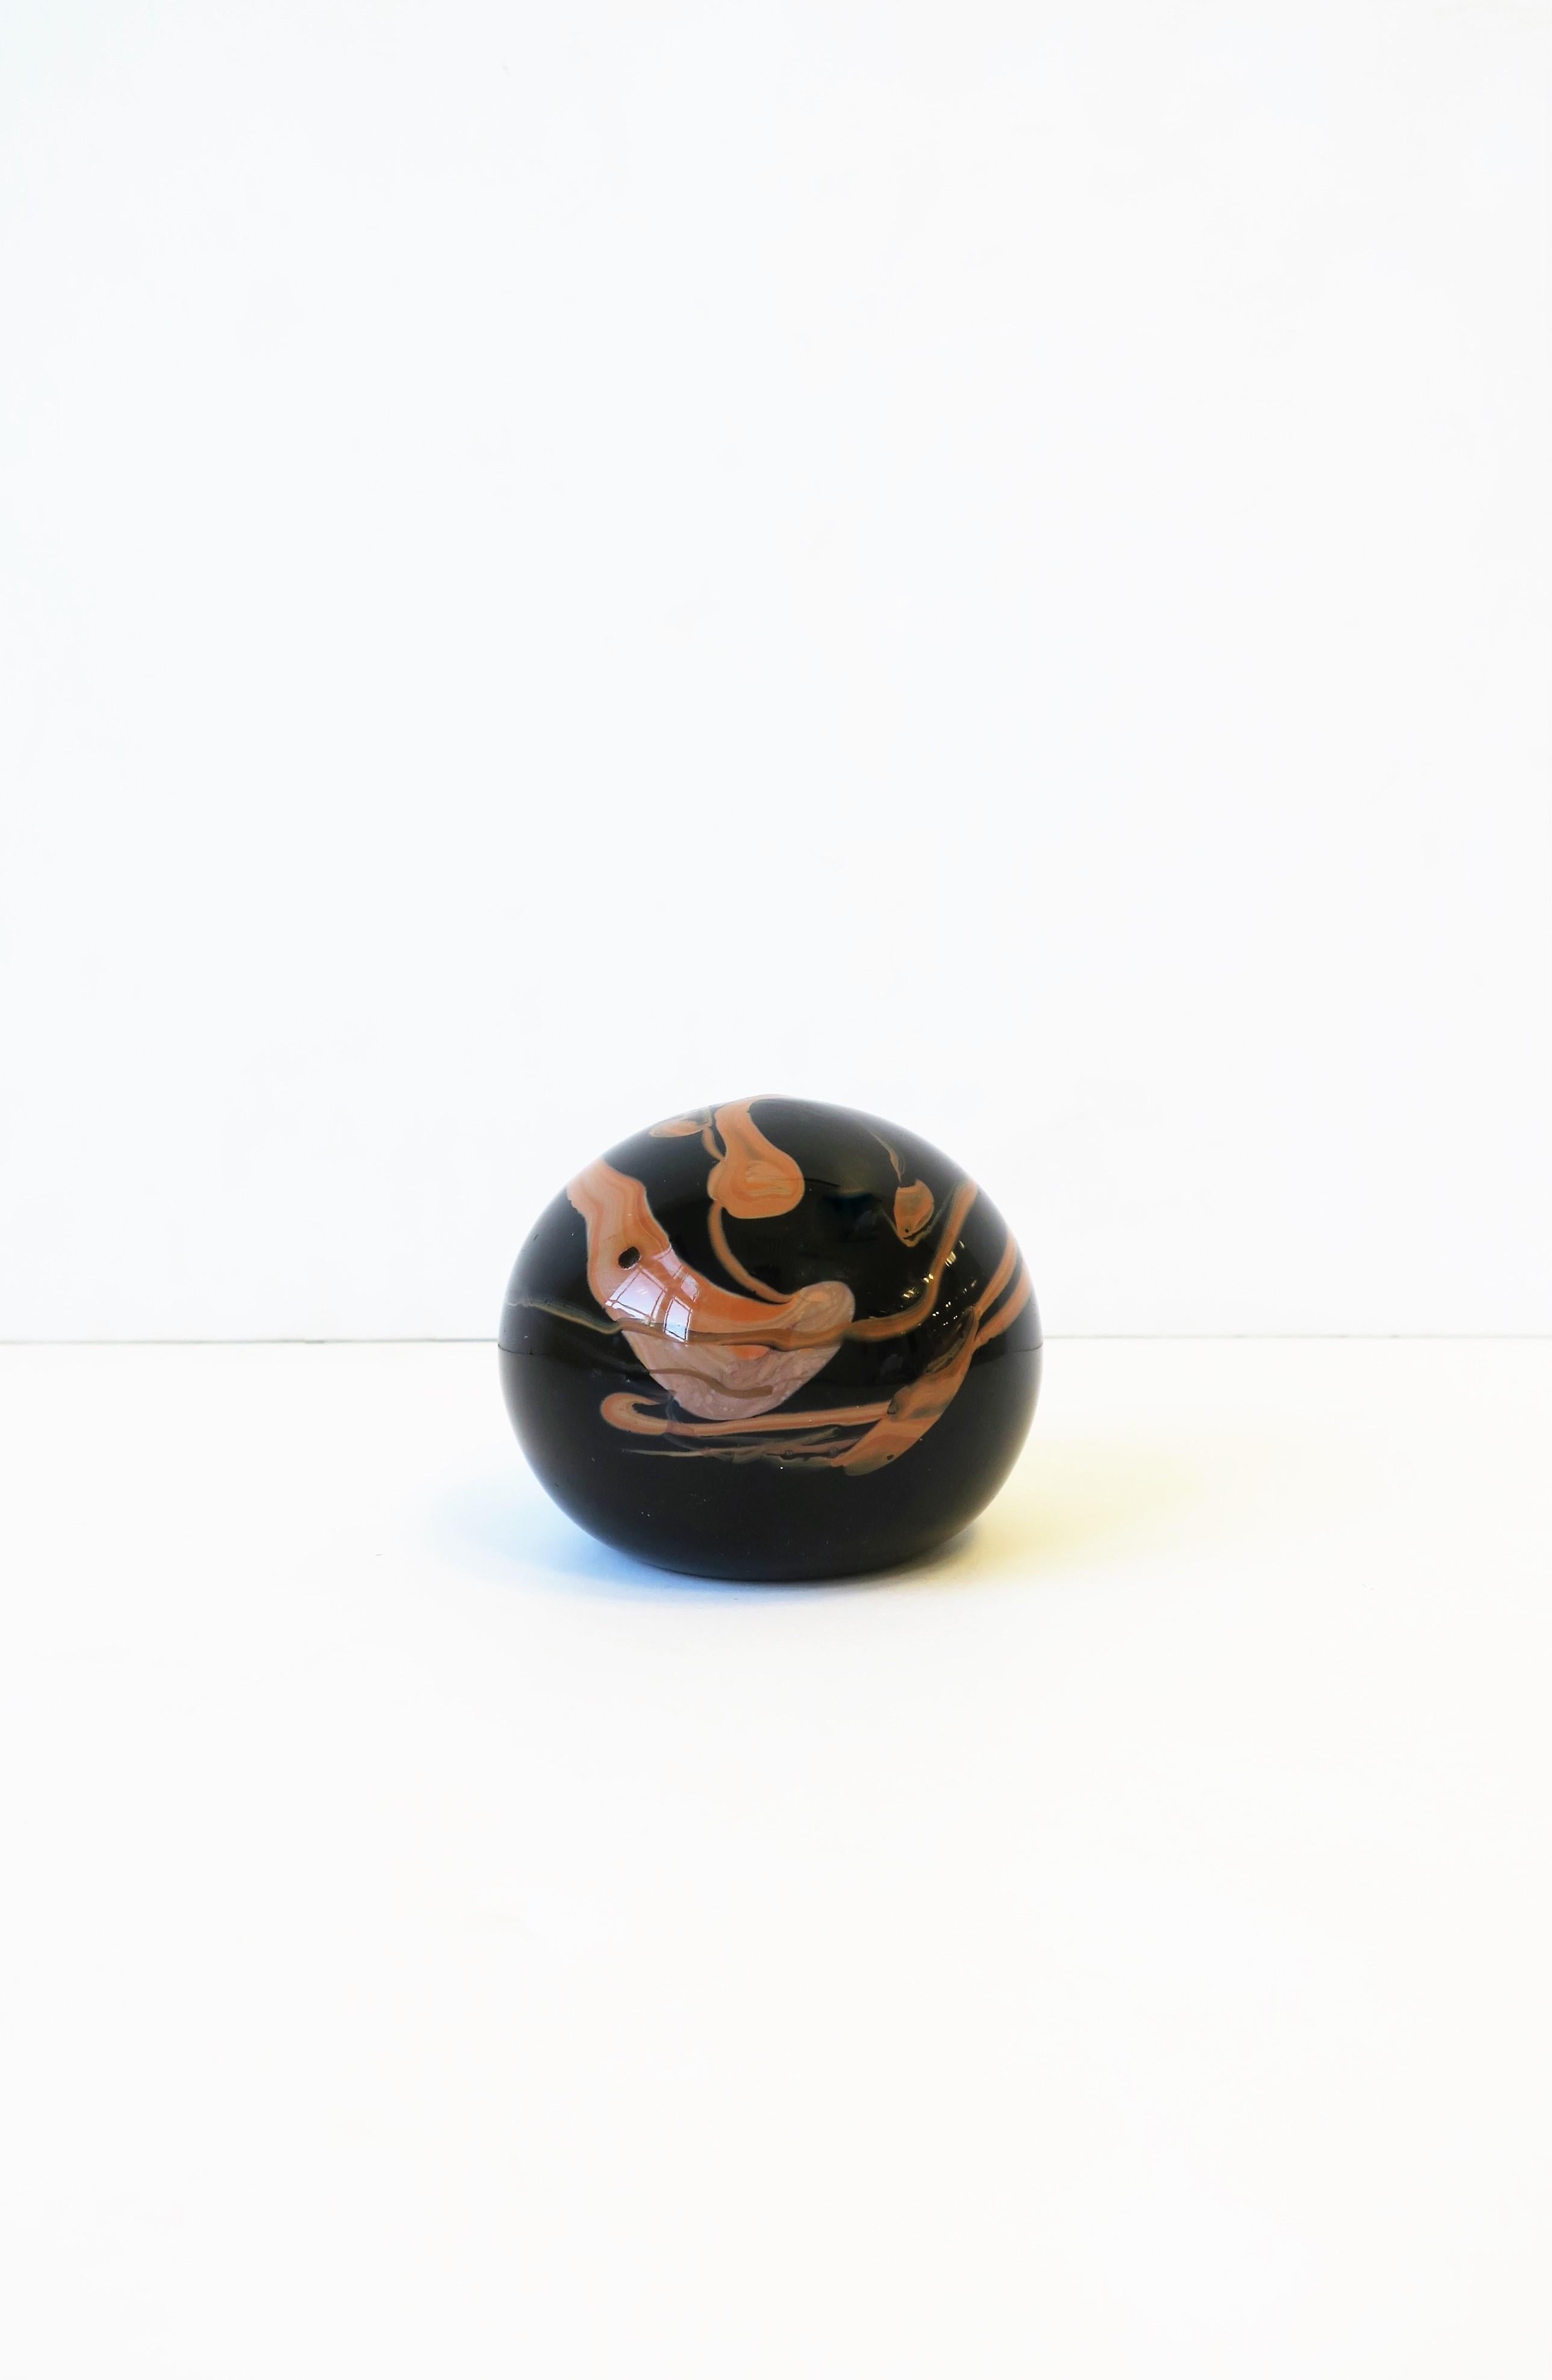 American Modern Black Art Glass Paperweight or Decorative Object, circa 1970s For Sale